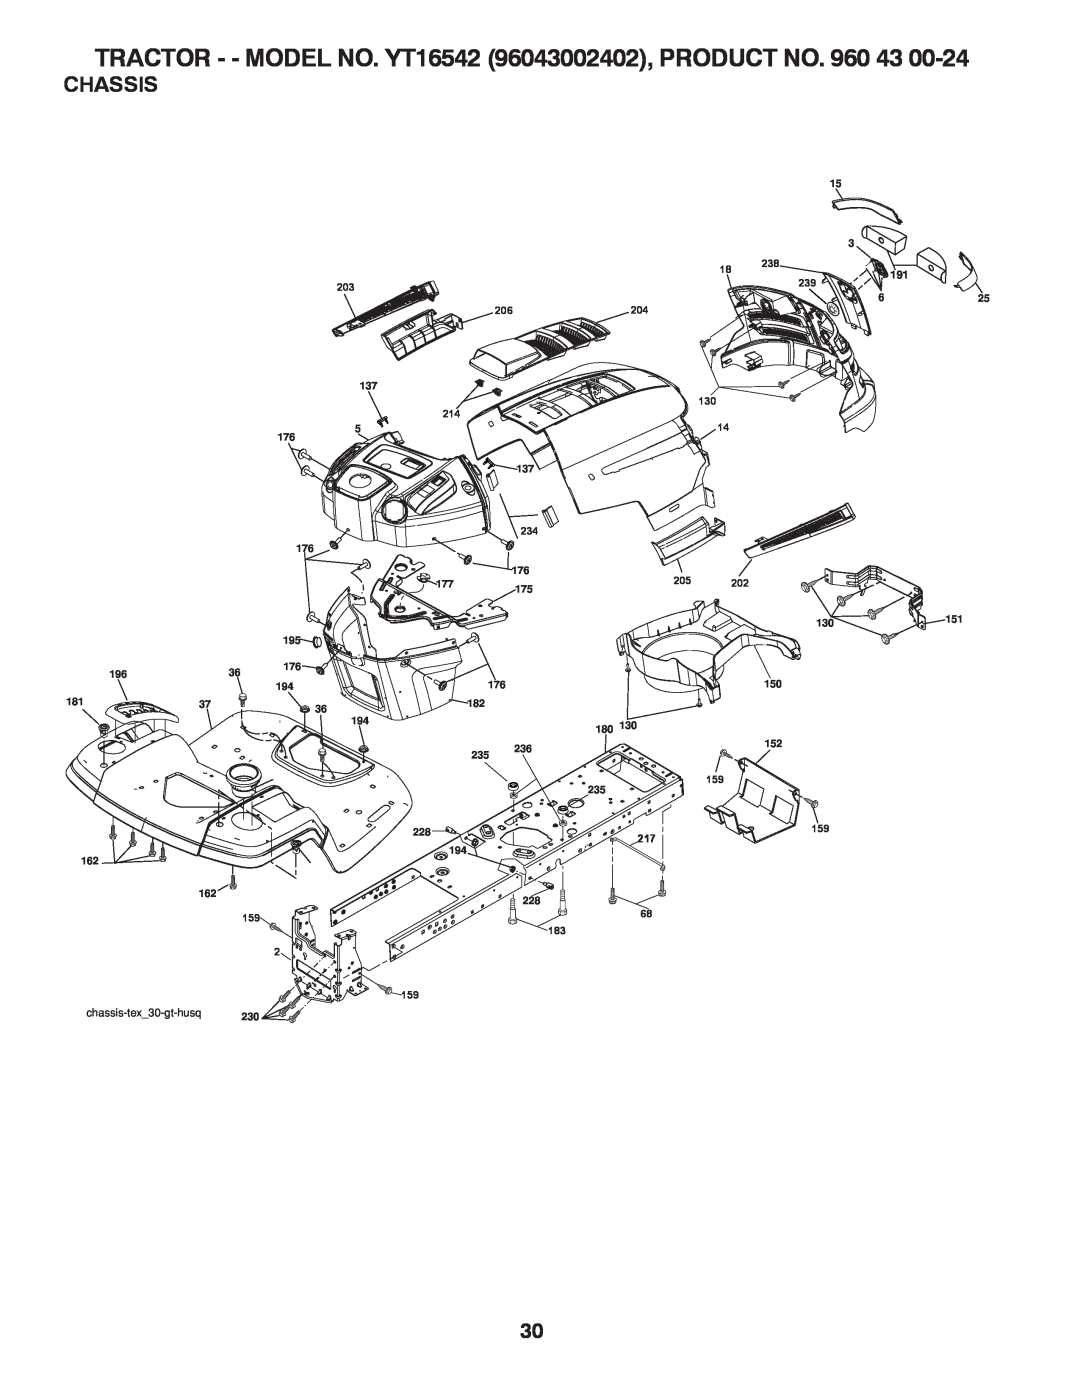 Husqvarna owner manual Chassis, TRACTOR - - MODEL NO. YT16542 96043002402, PRODUCT NO, 206 214, 204, 159 